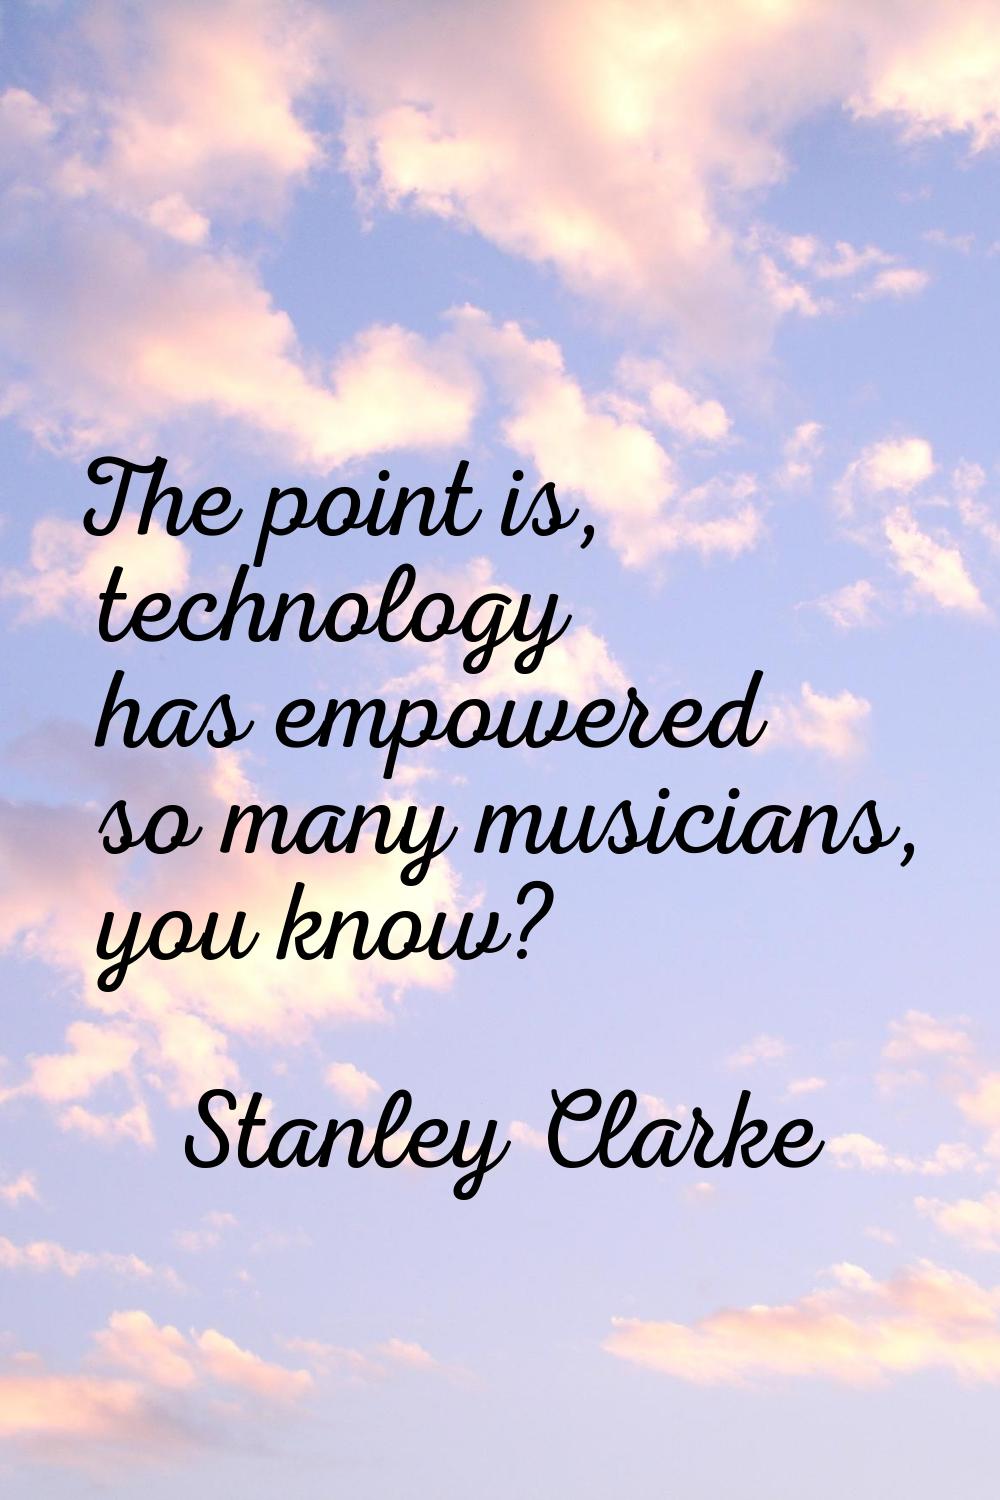 The point is, technology has empowered so many musicians, you know?